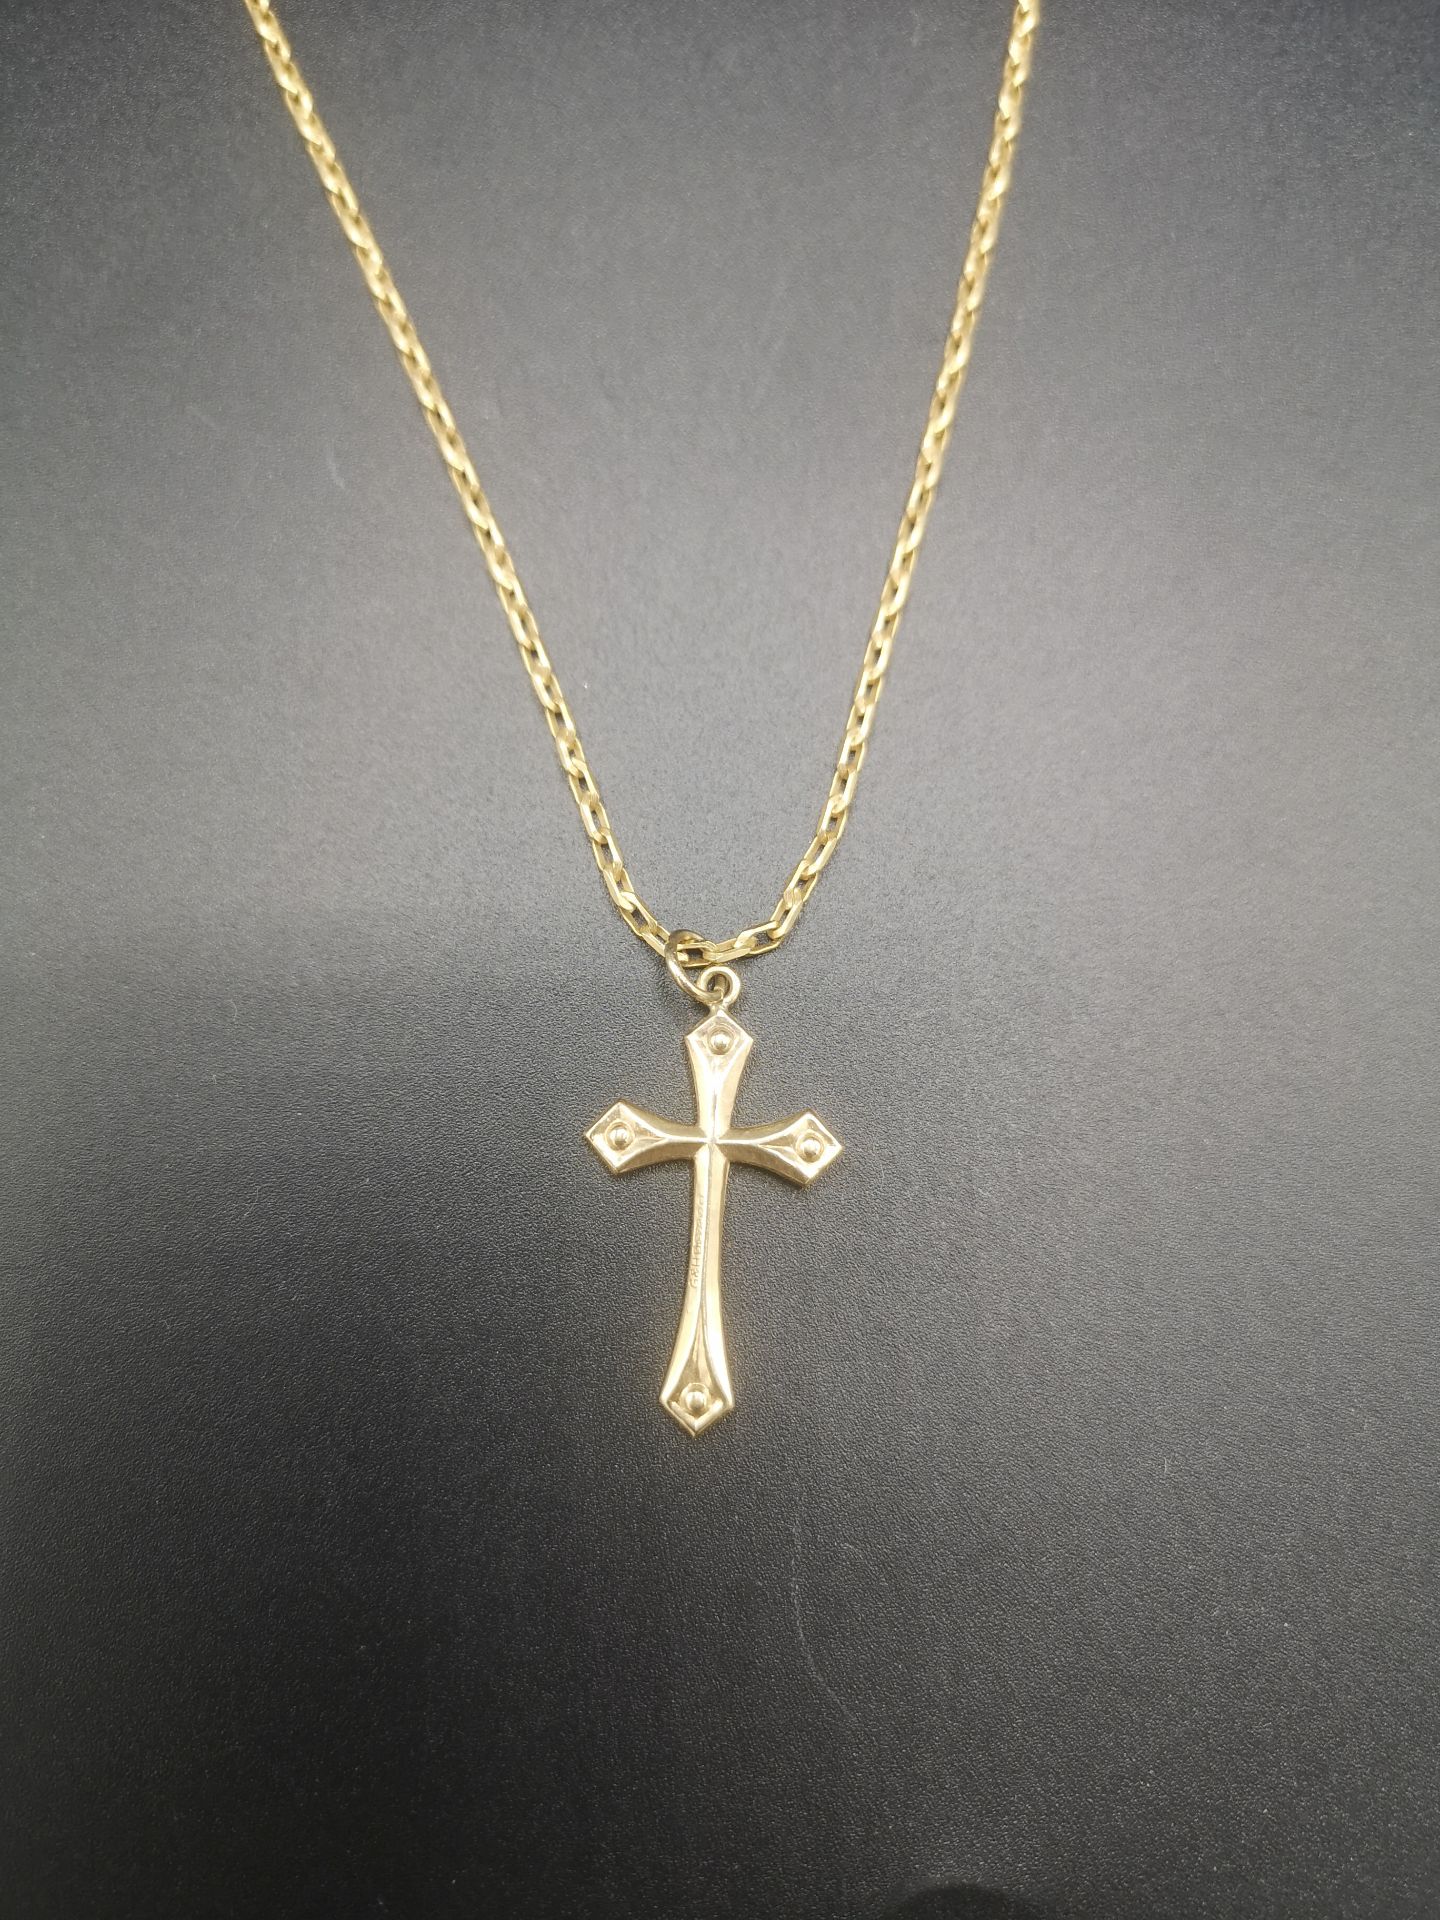 9ct gold necklace and crucifix - Image 3 of 6